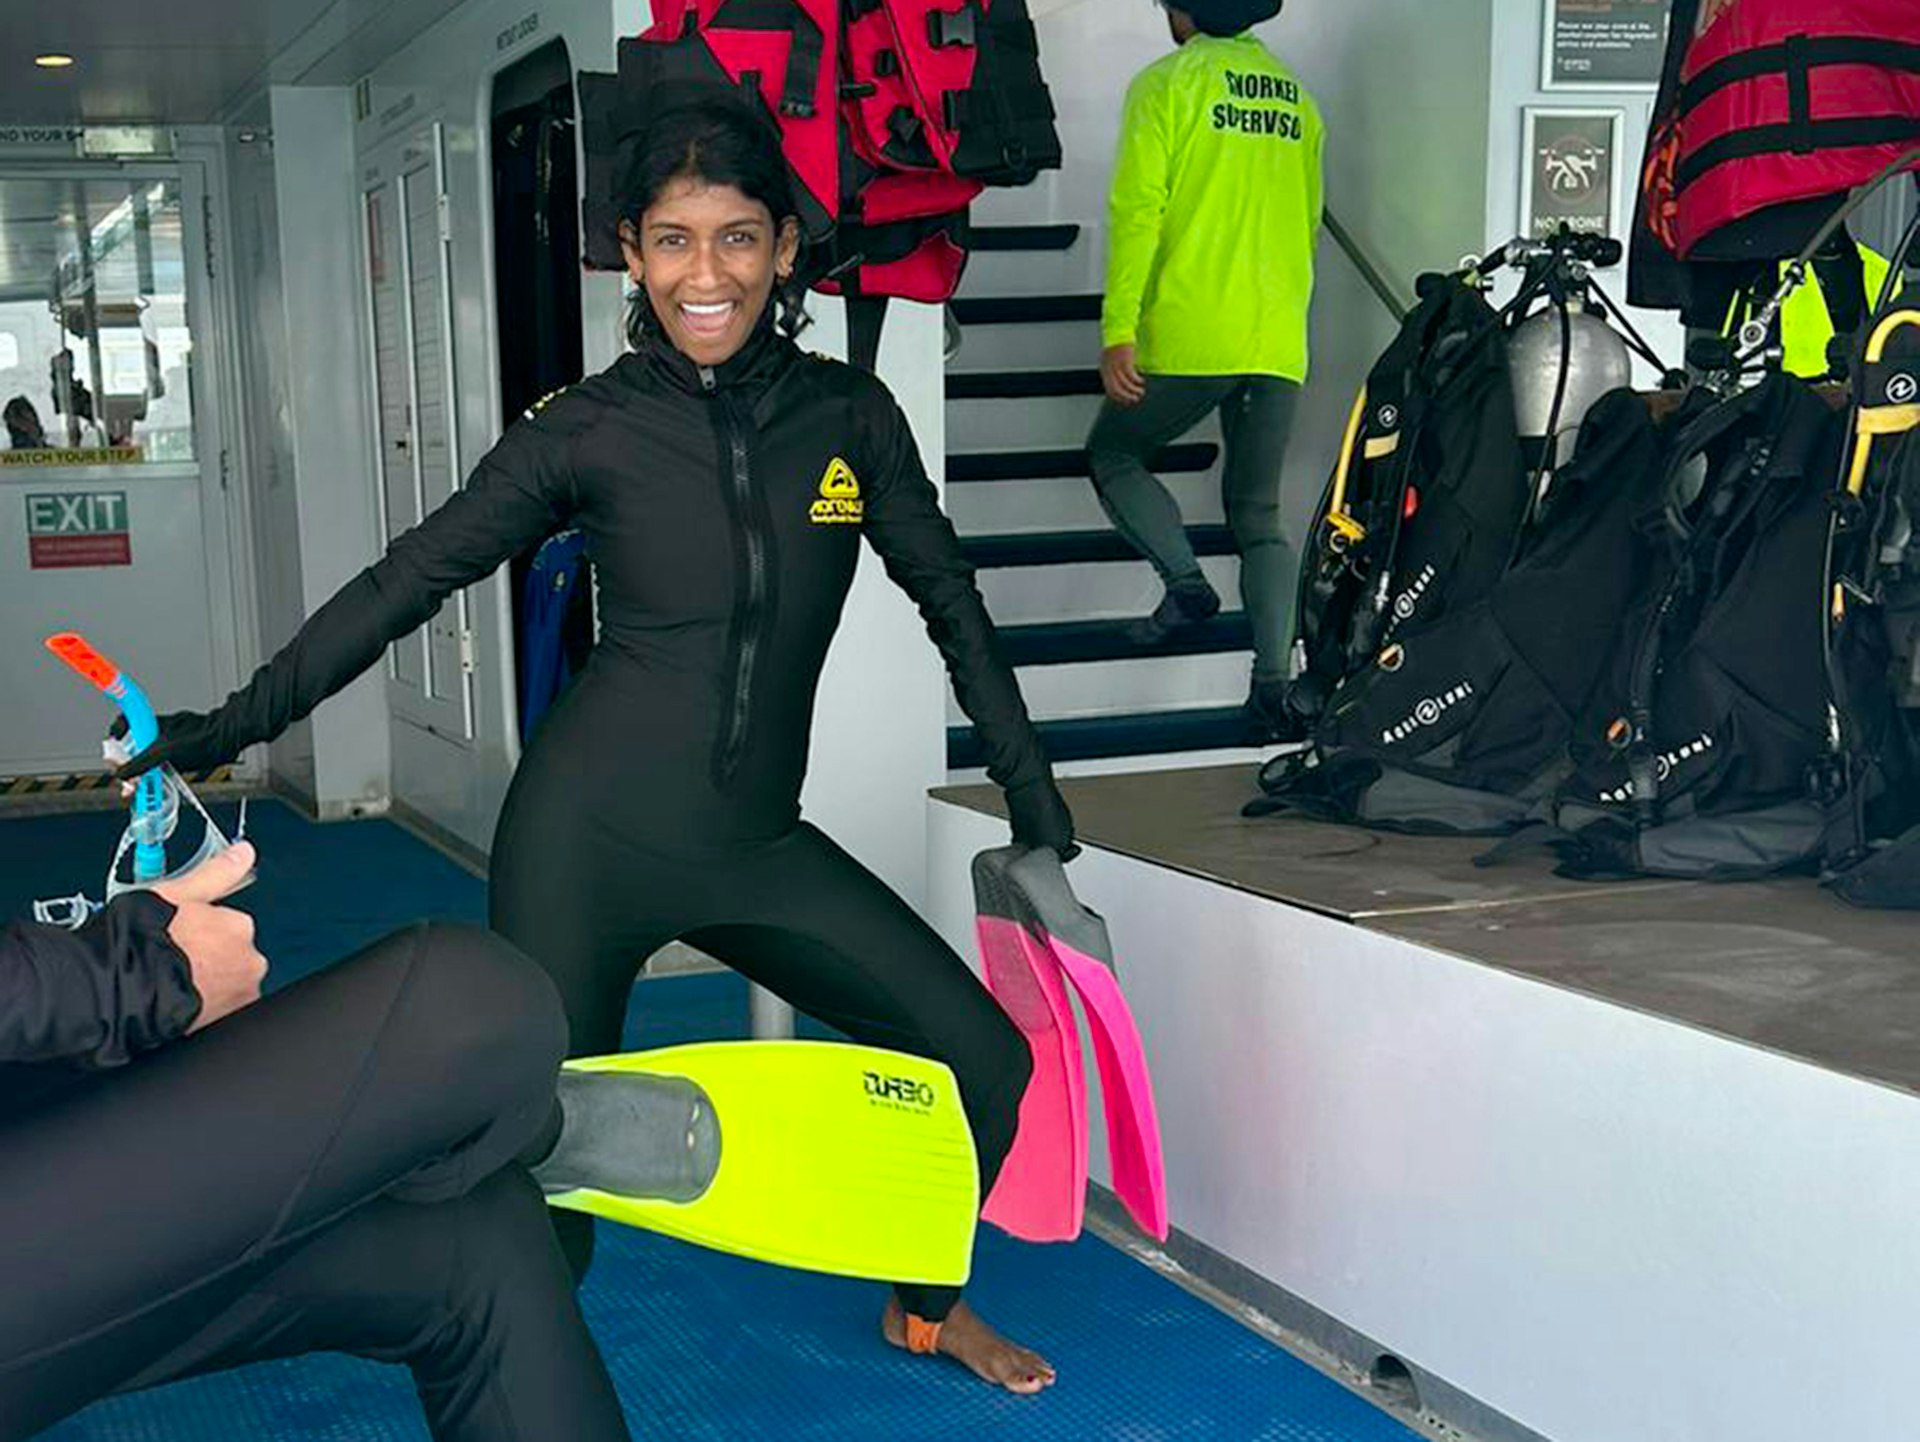 A woman on a dive boat smiles at the camera as she puts on her diving gear